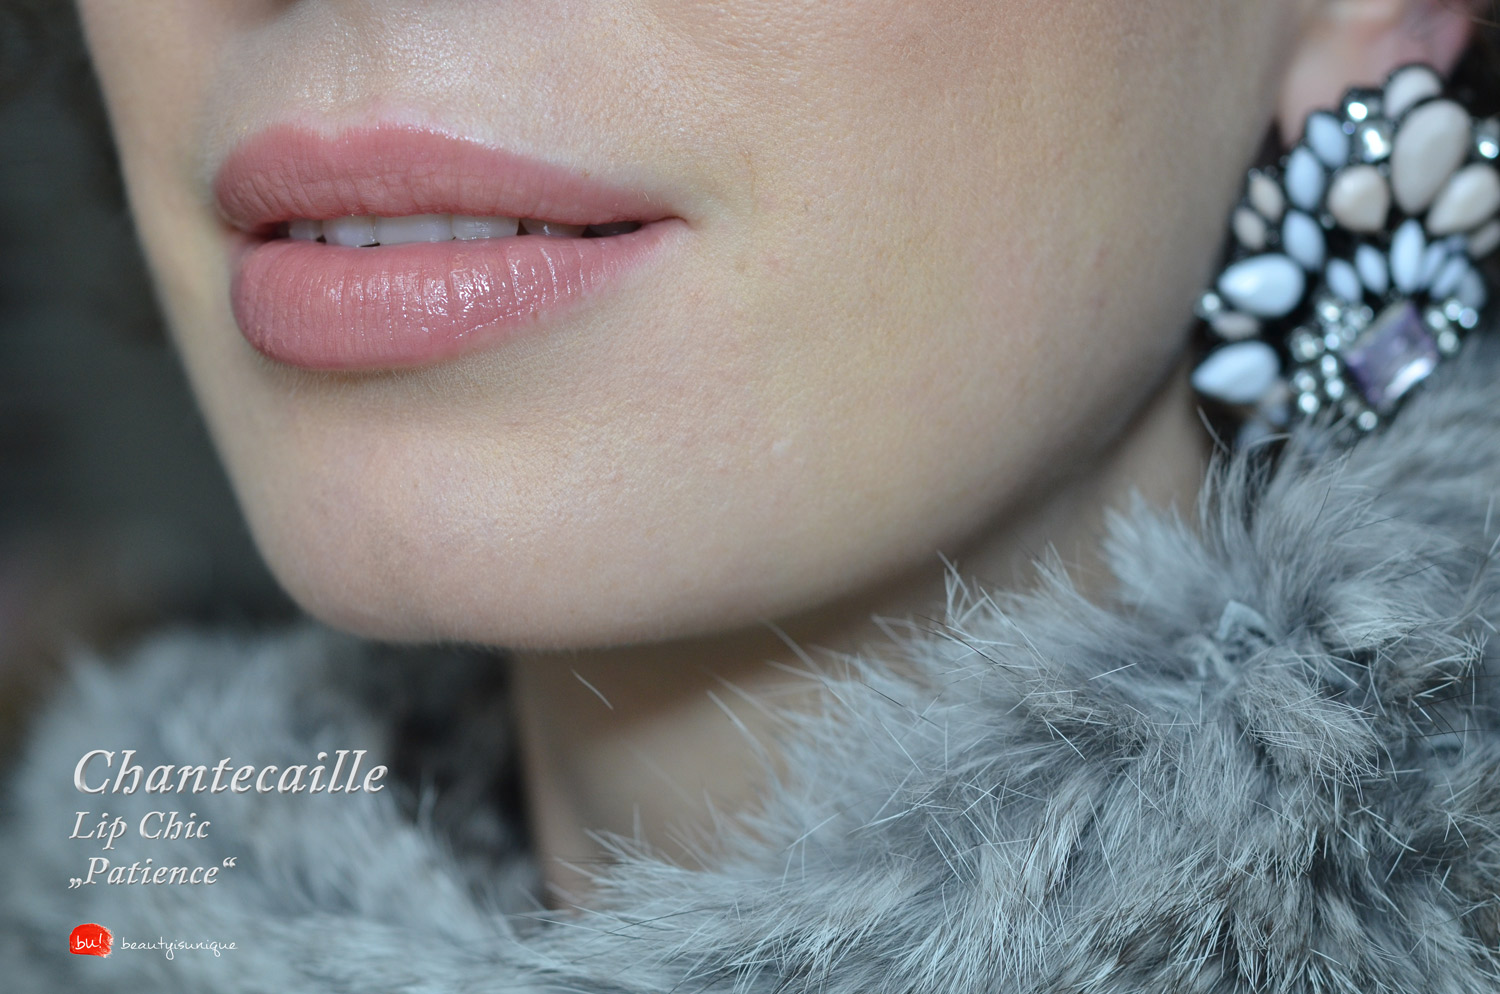 chantecaille-patience-lip-chic-swatches